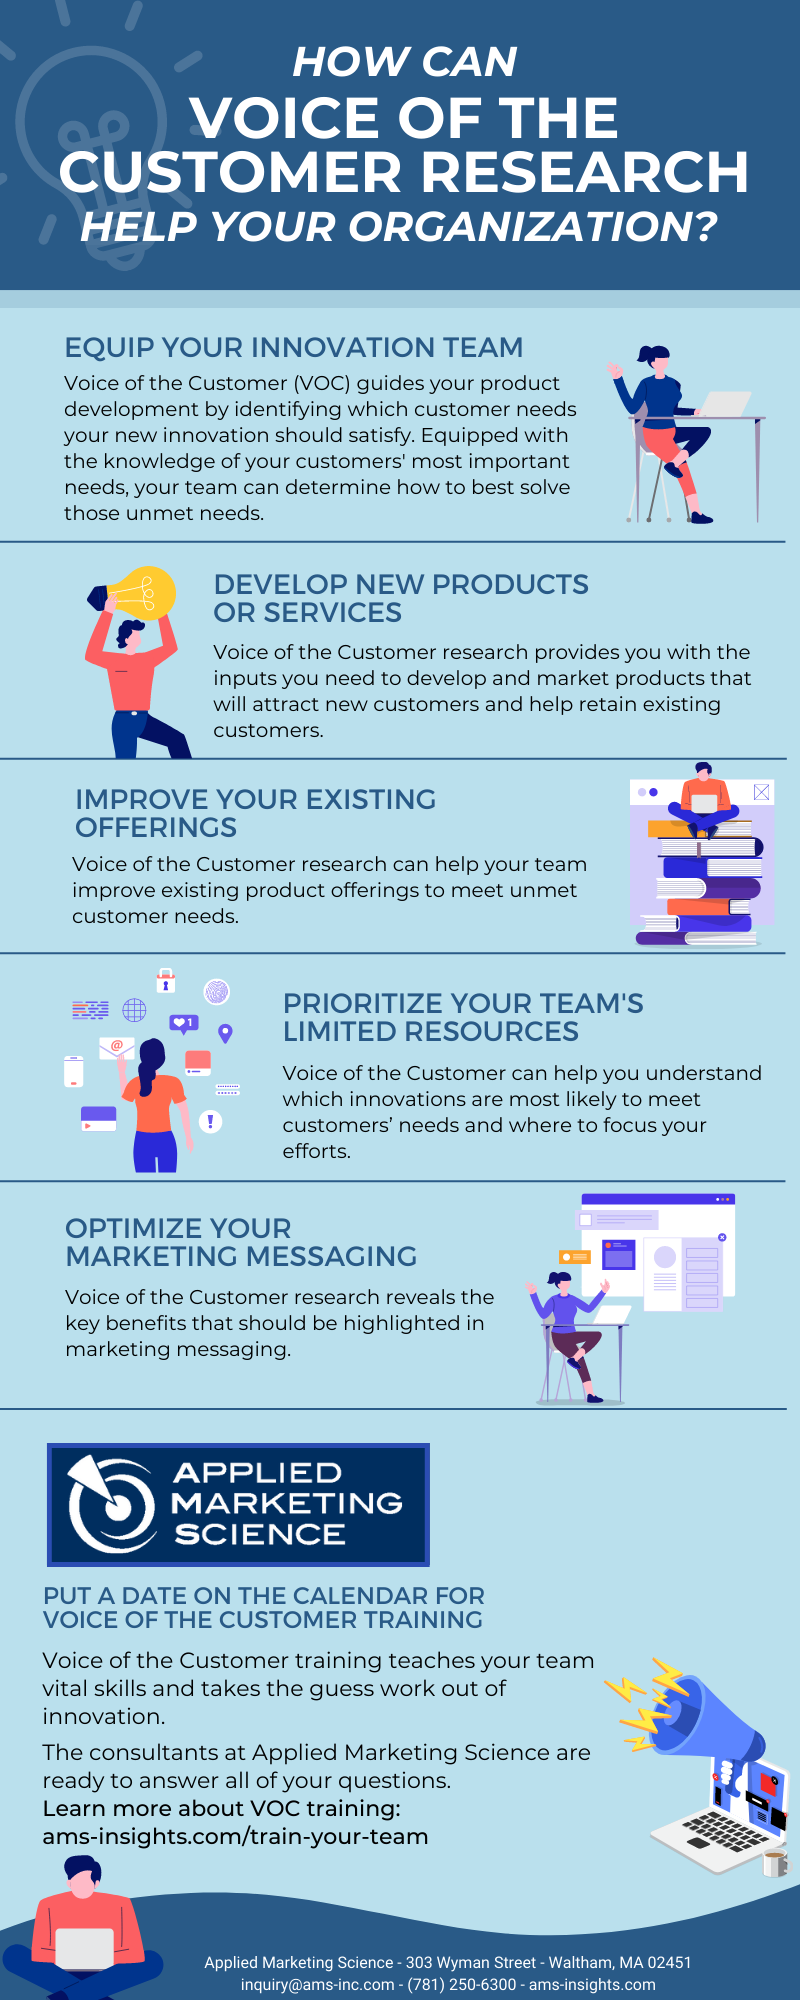 How Can Voice of the Customer Research Help Your Organization [Infographic]